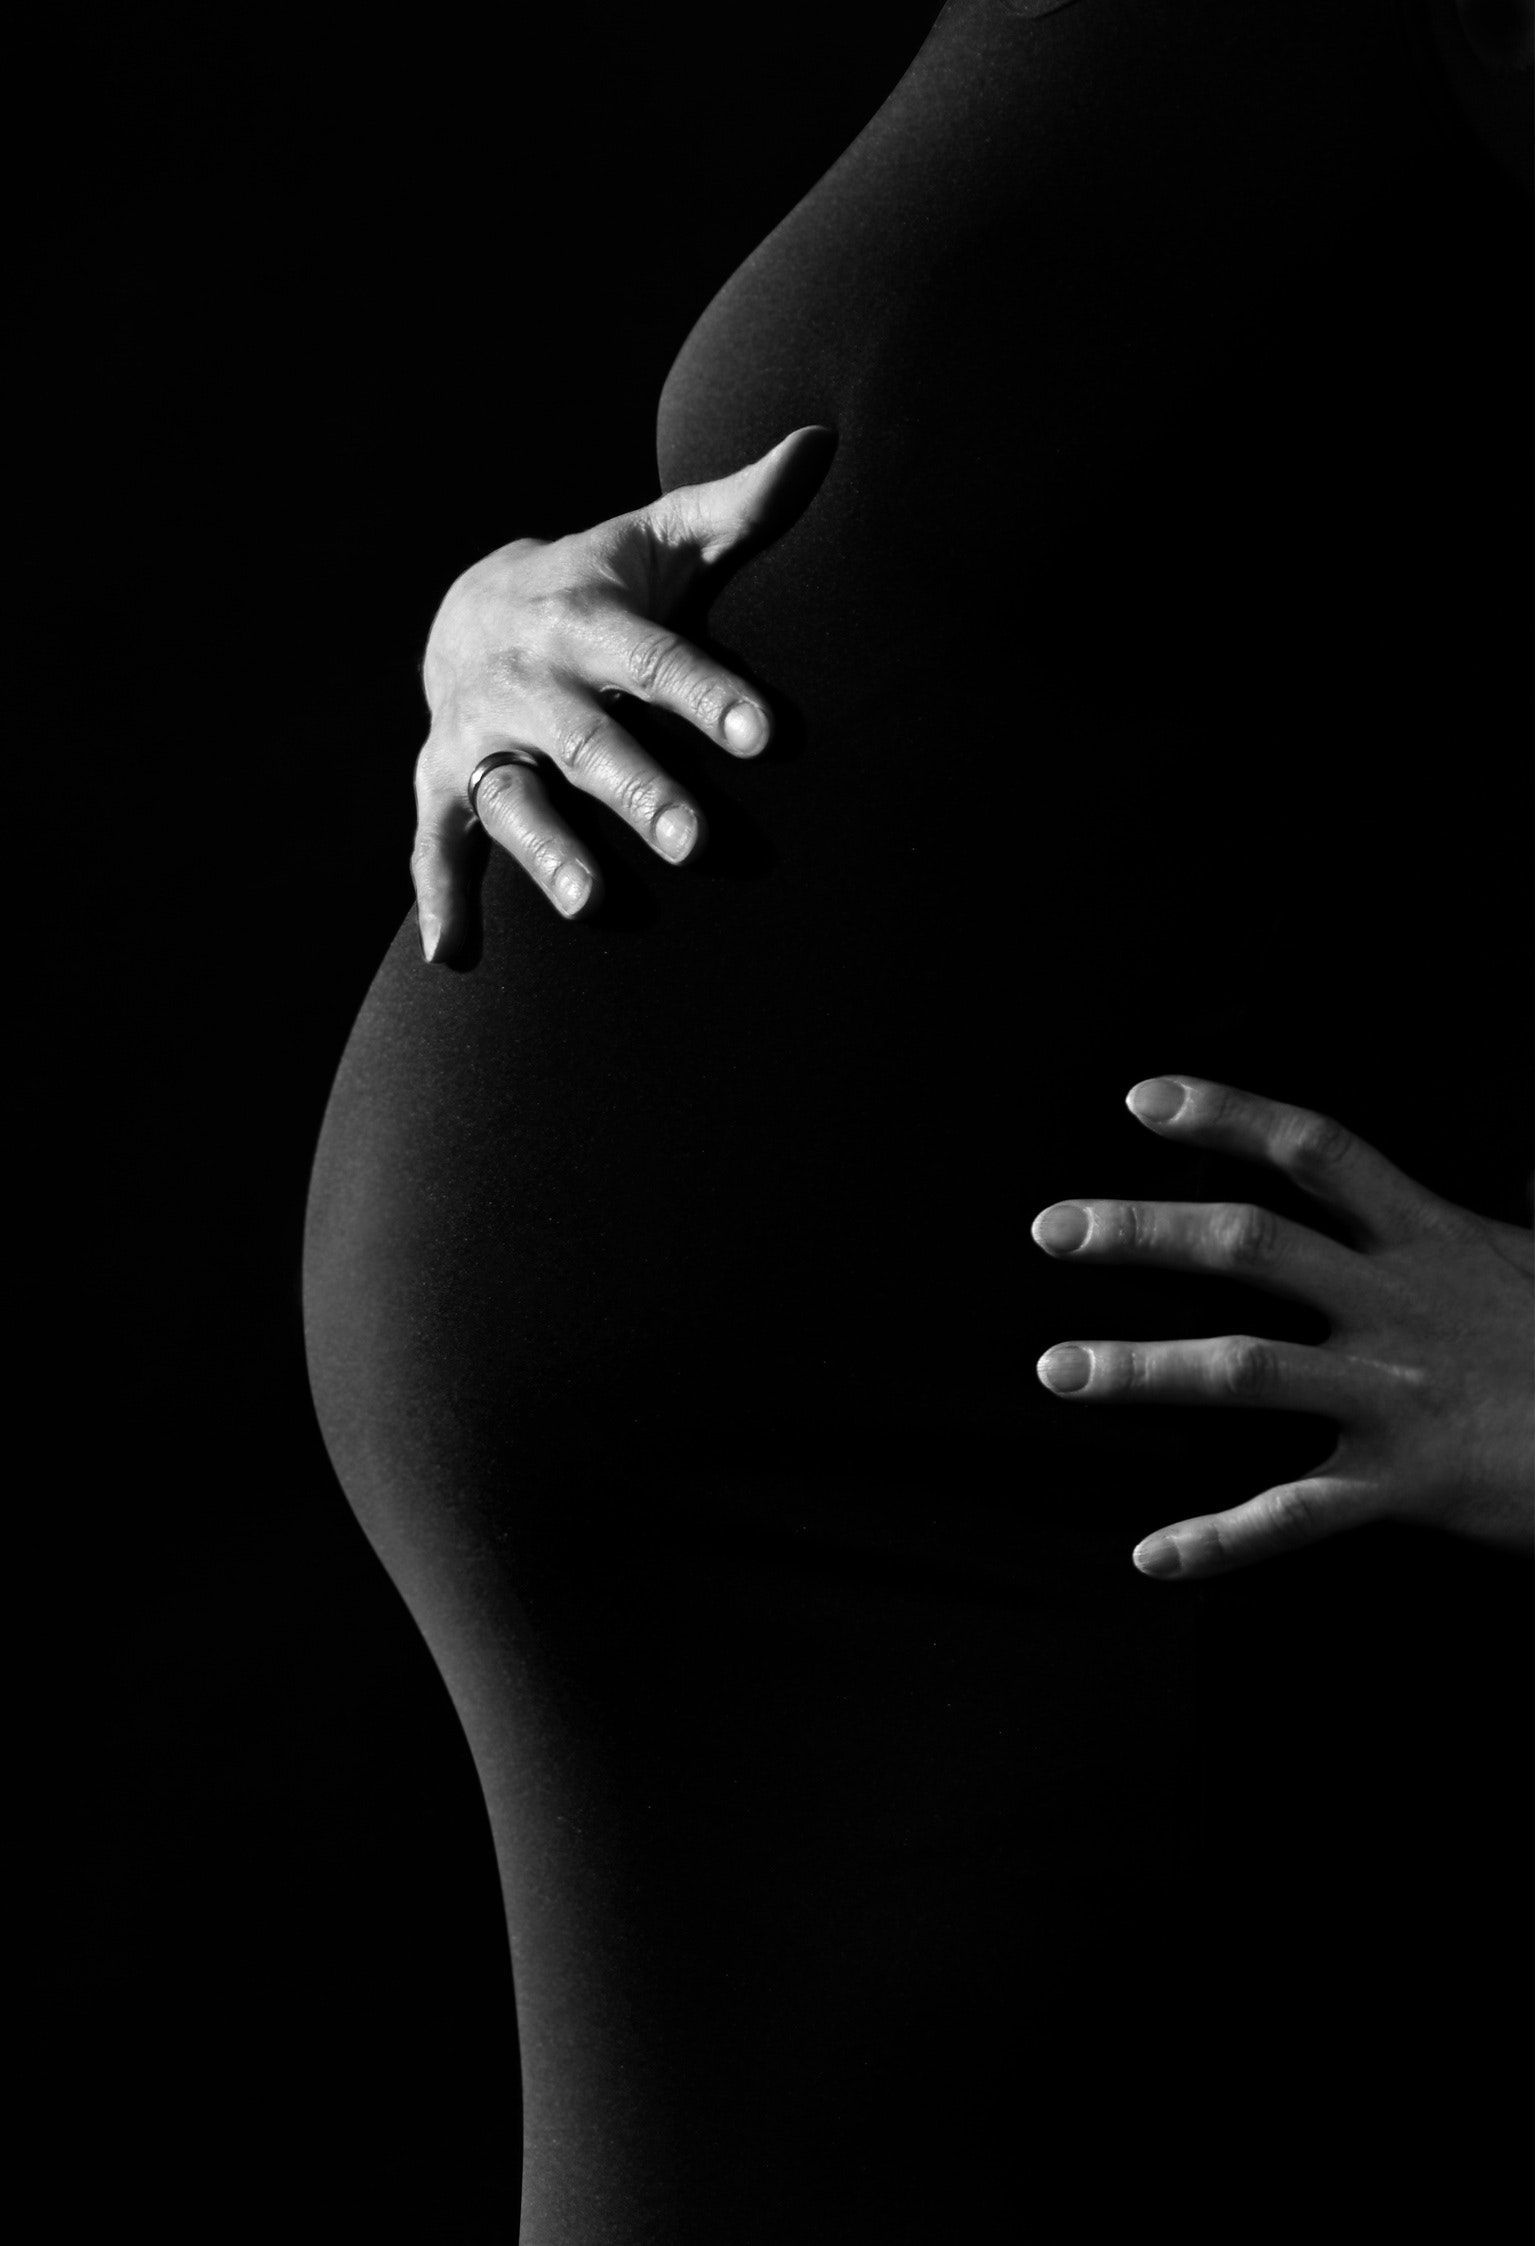 PPhoto by Pixabay: https://www.pexels.com/photo/gray-scale-photo-of-a-pregnant-woman-46207/